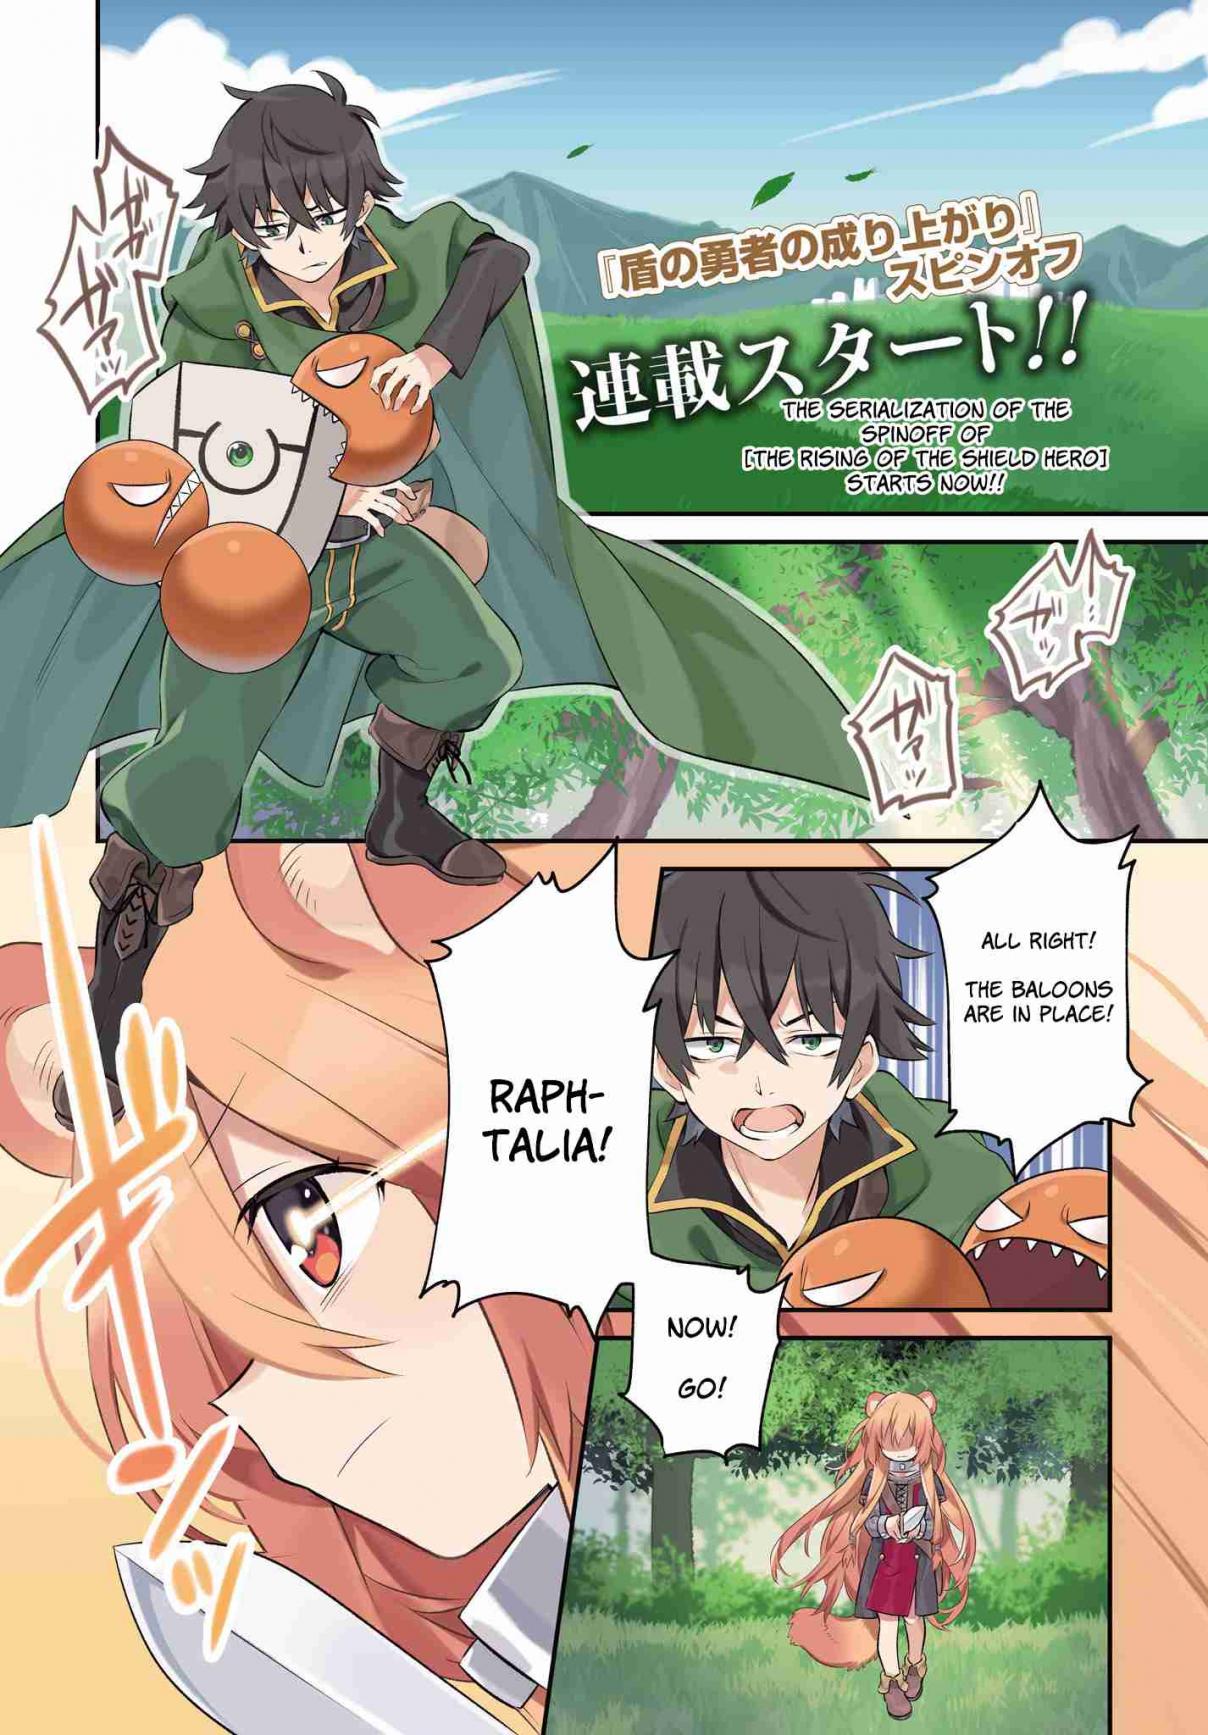 A day in the life of the shield hero Vol. 1 Ch. 1